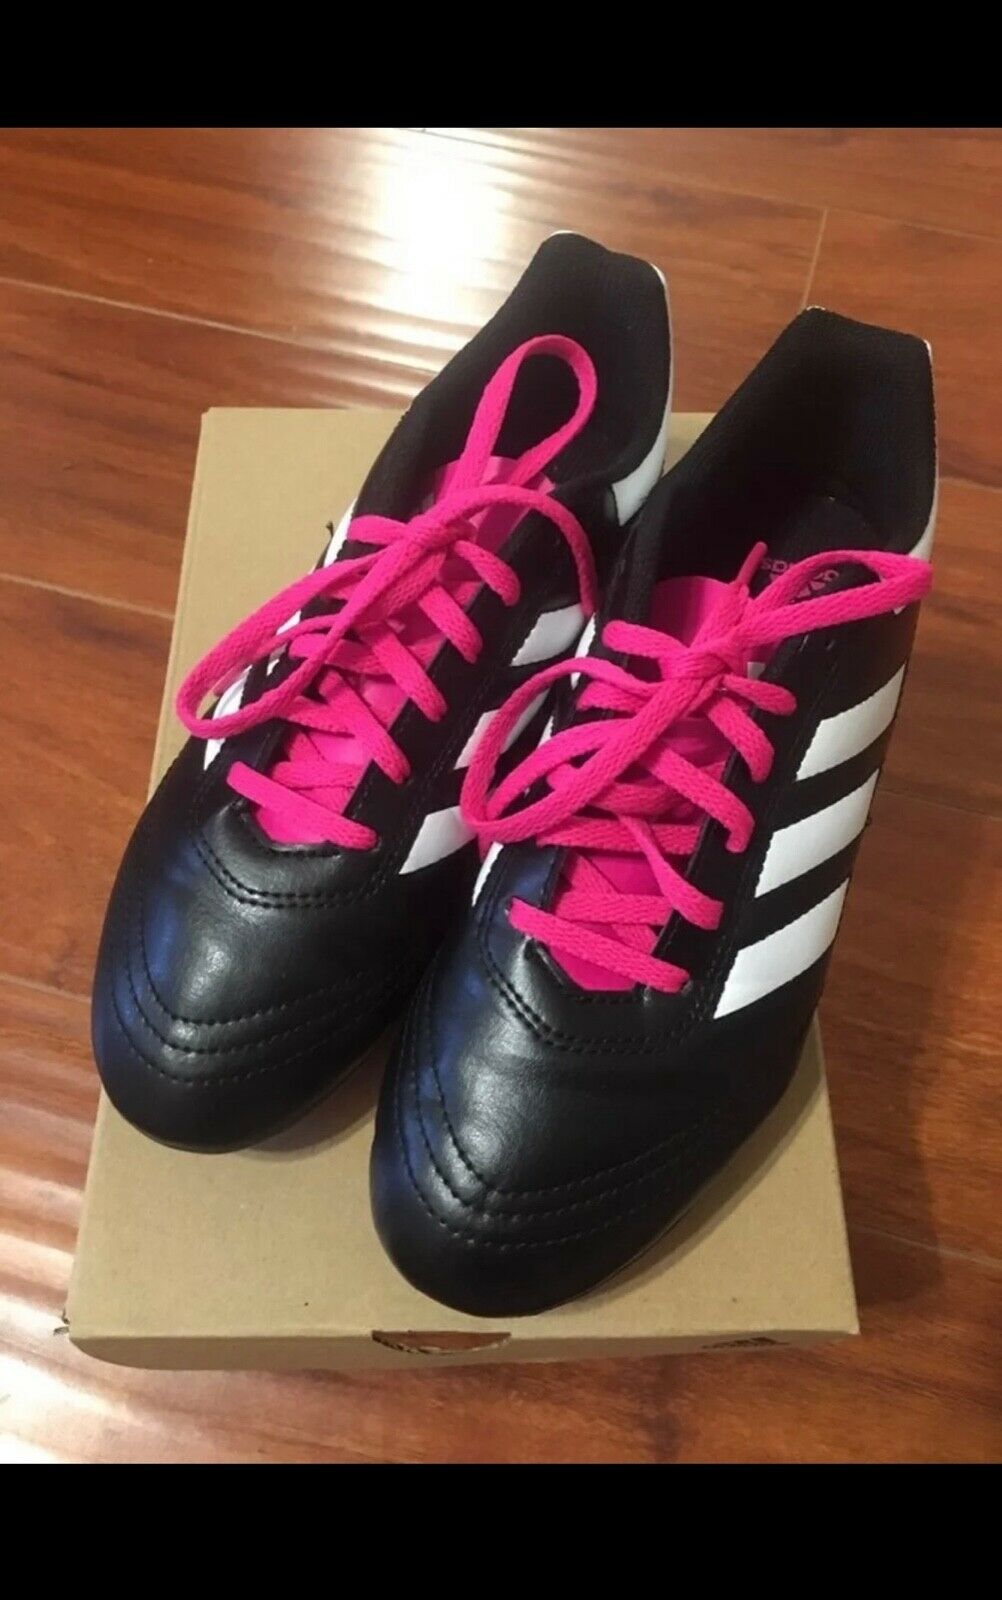 Adidas Youth Size 5 Soccer Shoes with cleats Pink Black White BB0571